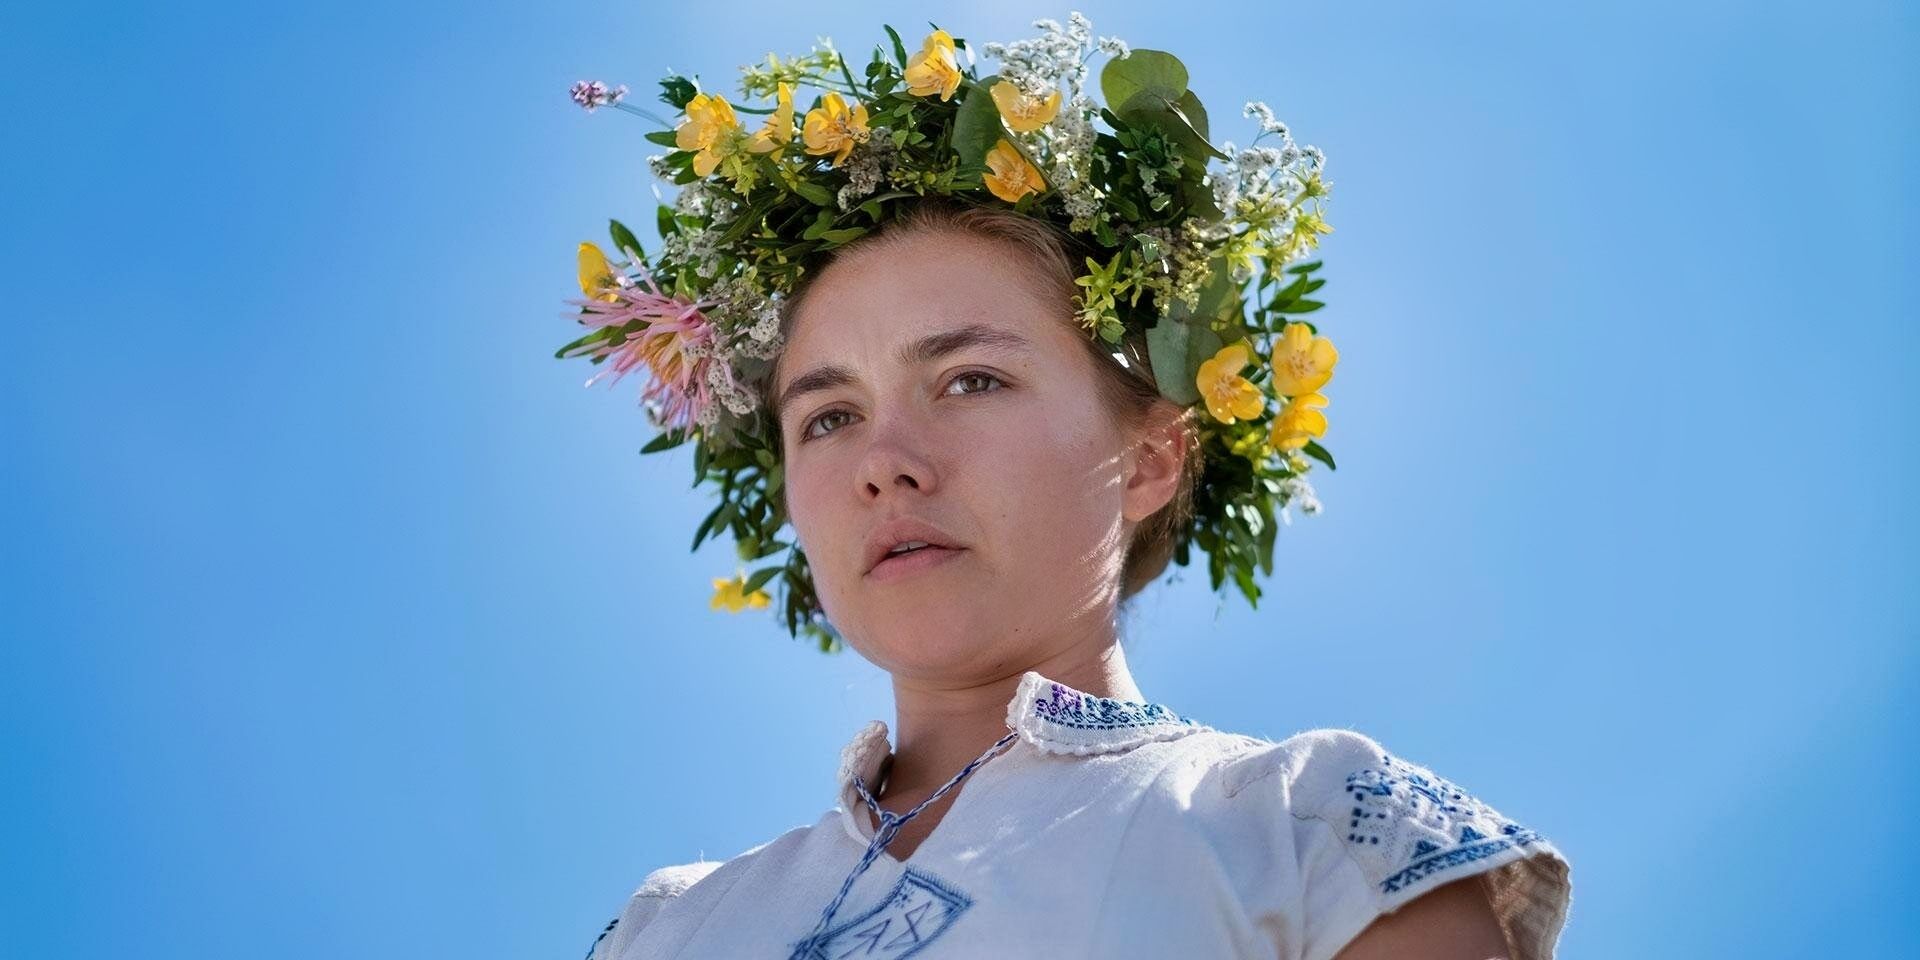 Dani as the May Queen in Midsommar.